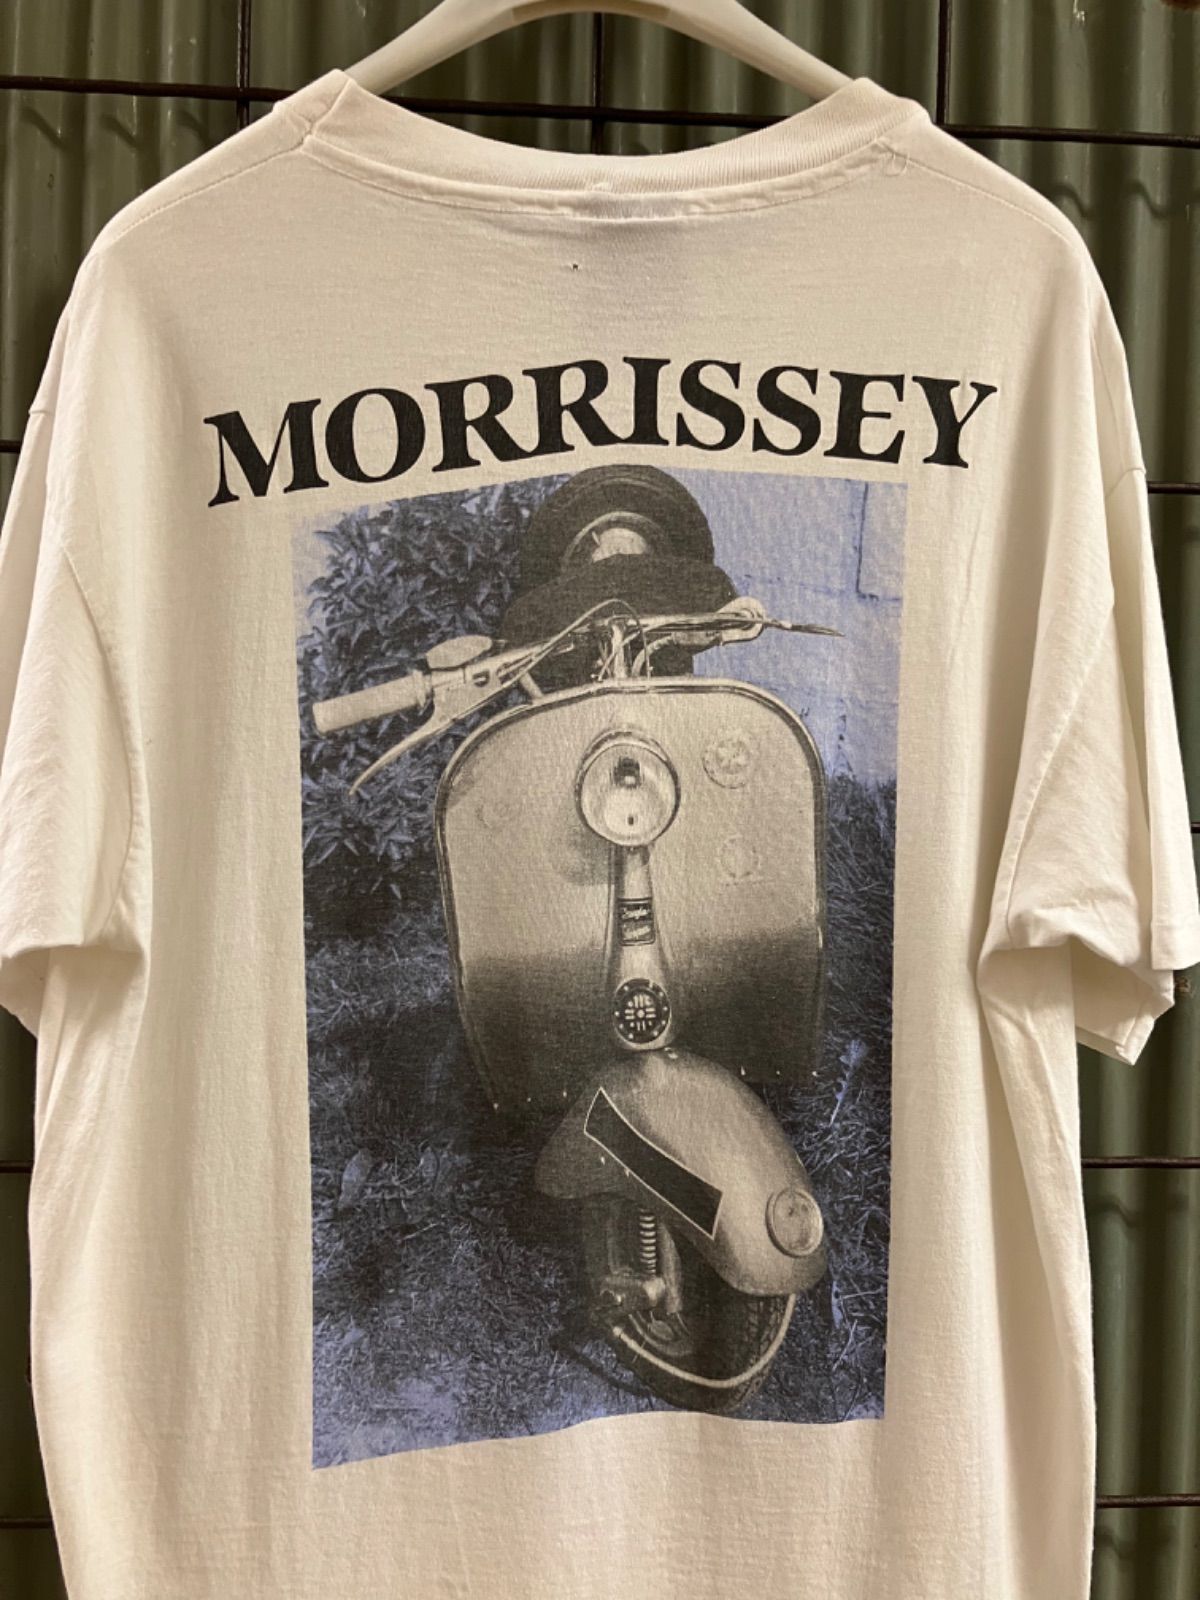 90s MORRISSEY Your Arsenal Tシャツ